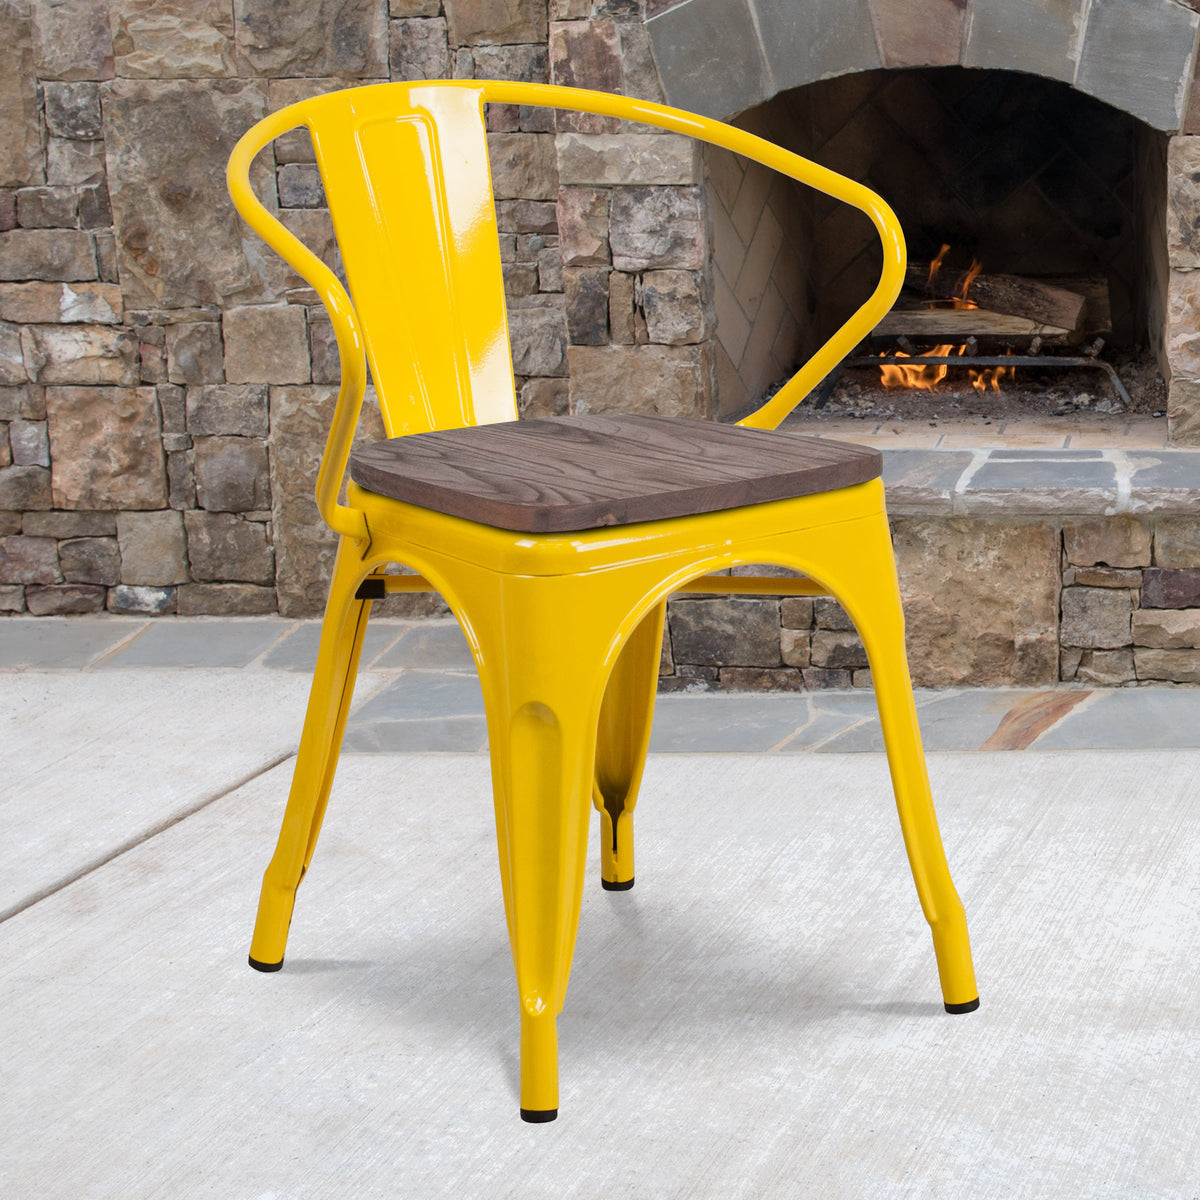 Yellow |#| Yellow Metal Chair with Wood Seat and Arms - Restaurant Furniture